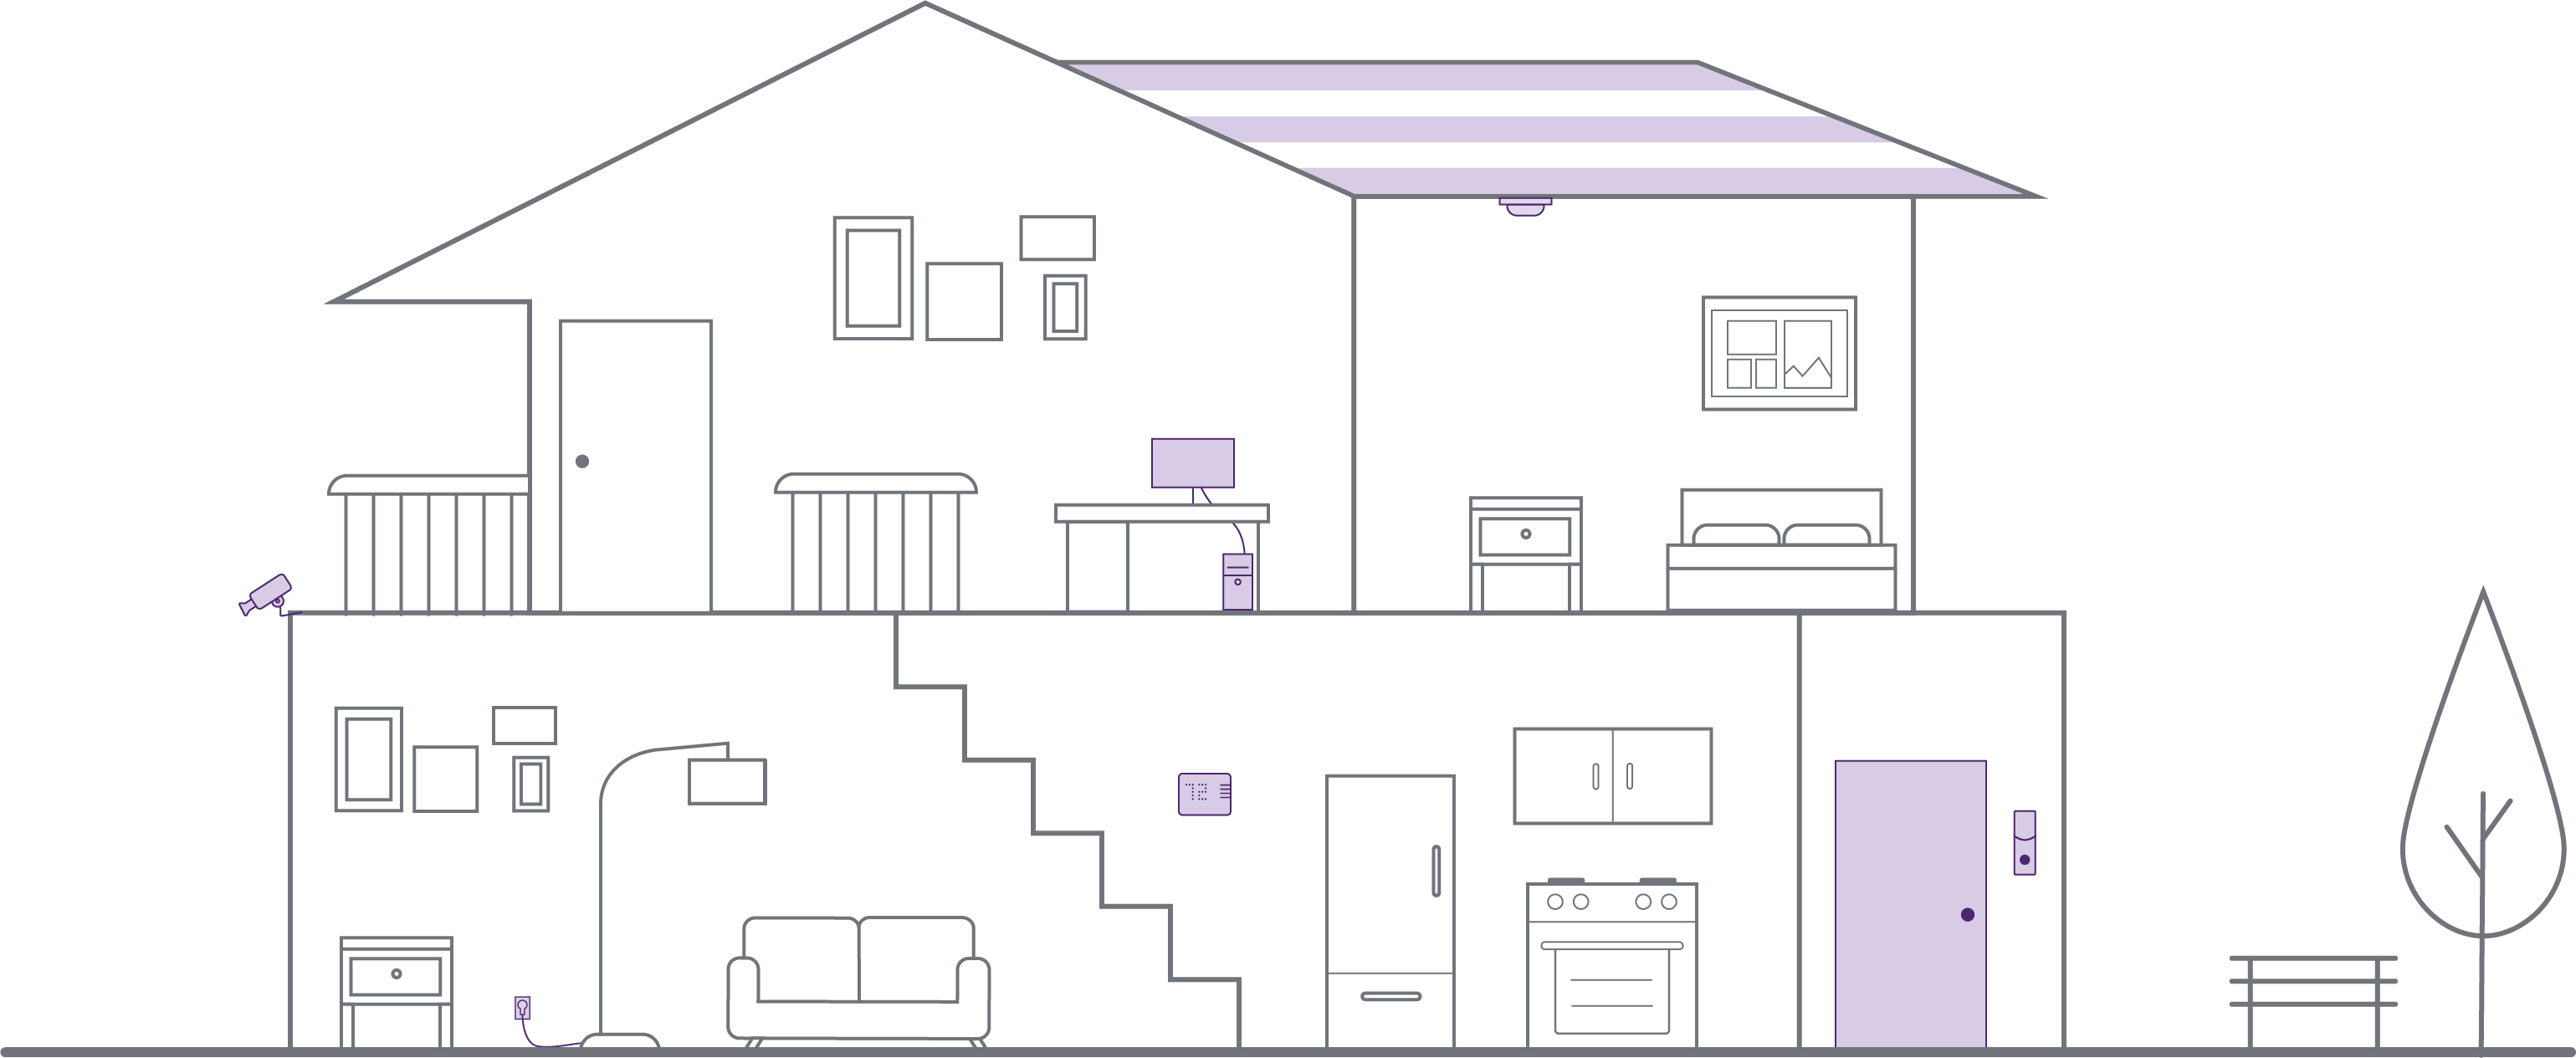 House blueprint drawing with smart home security devices